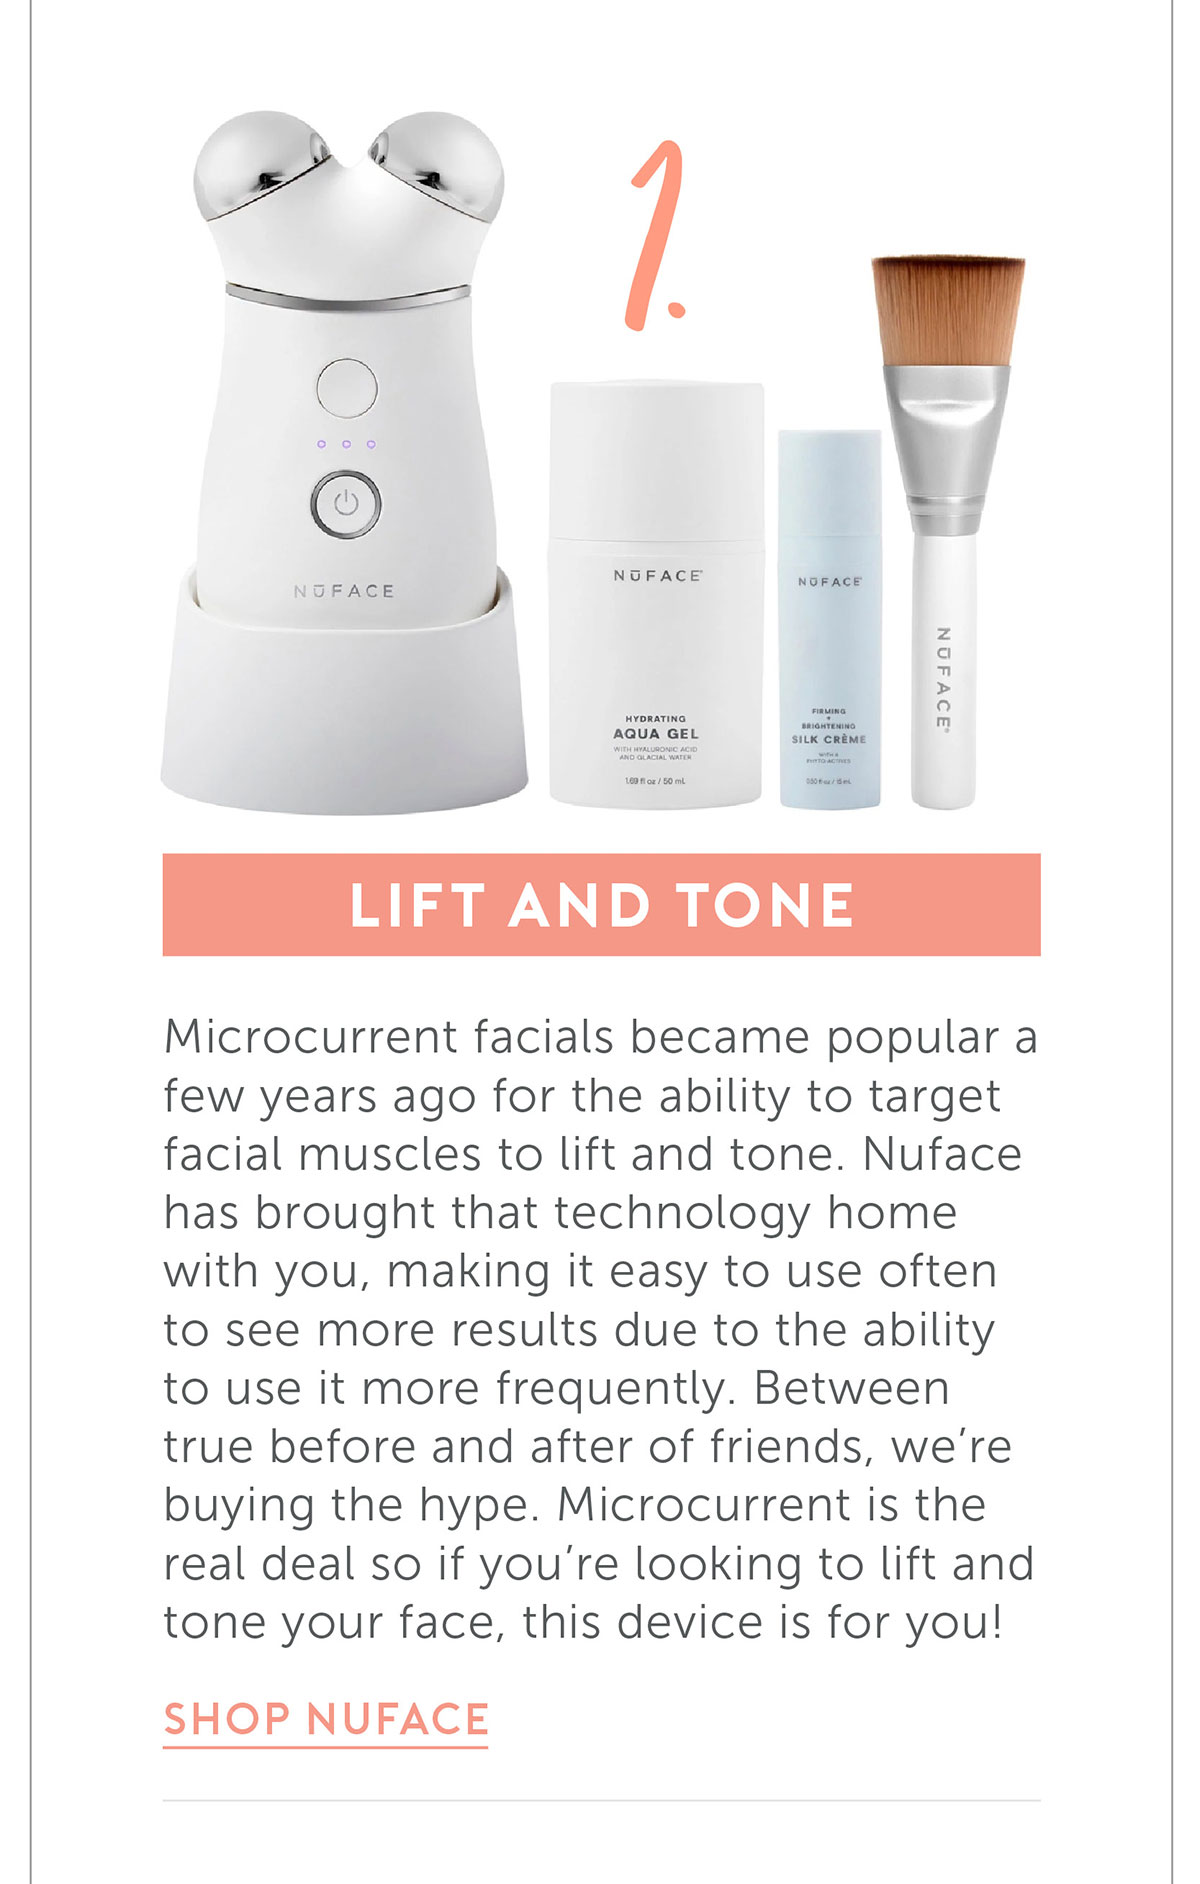 Lift and tone Microcurrent facials became popular a few years ago for the ability to target facial muscles to lift and tone. Nuface has brought that technology home with you, making it easy to use often to see more results due to the ability to use it more frequently. Between true before and after of friends, we’re buying the hype. Microcurrent is the real deal so if you’re looking to lift and tone your face, this device is for you!